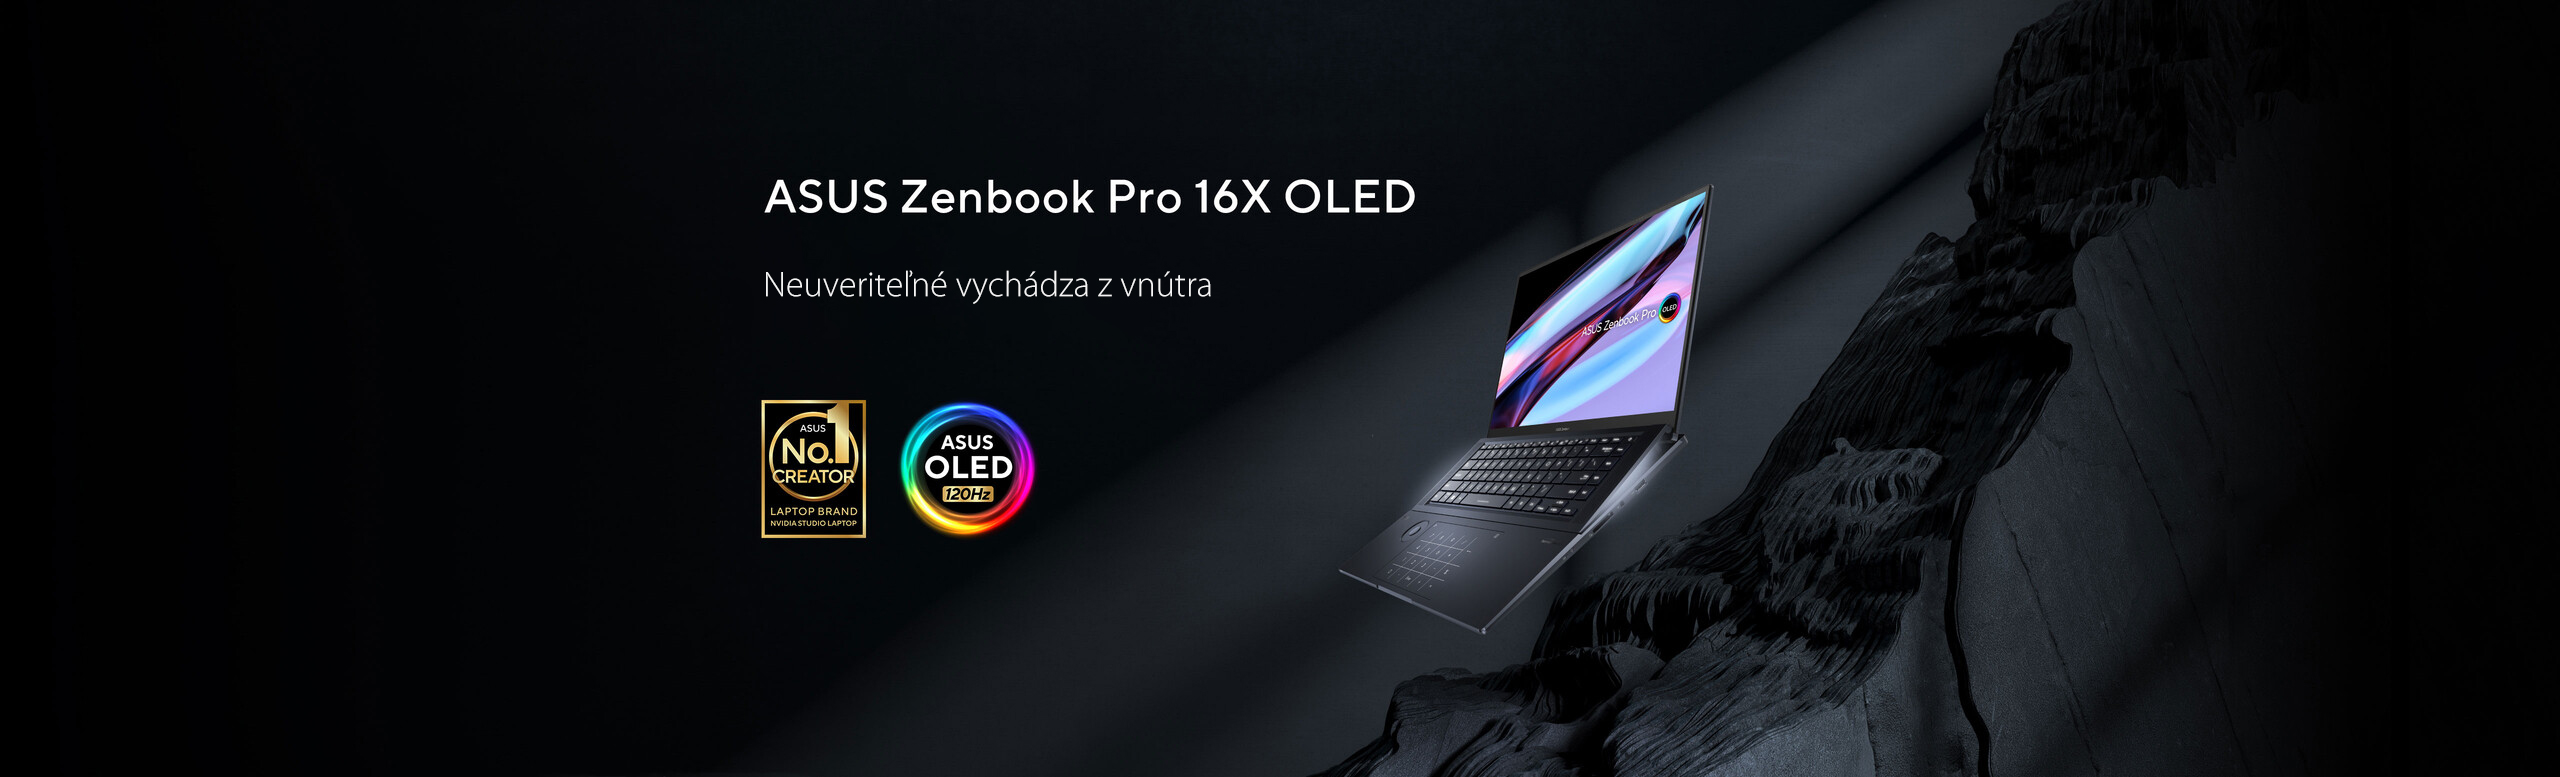 ASUS Zenbook Pro 16X OLED opened with 120 degrees tilted on the surface of dark rock. The No1 Creator and ASUS 120Hz OLED logo are placed next to the model.